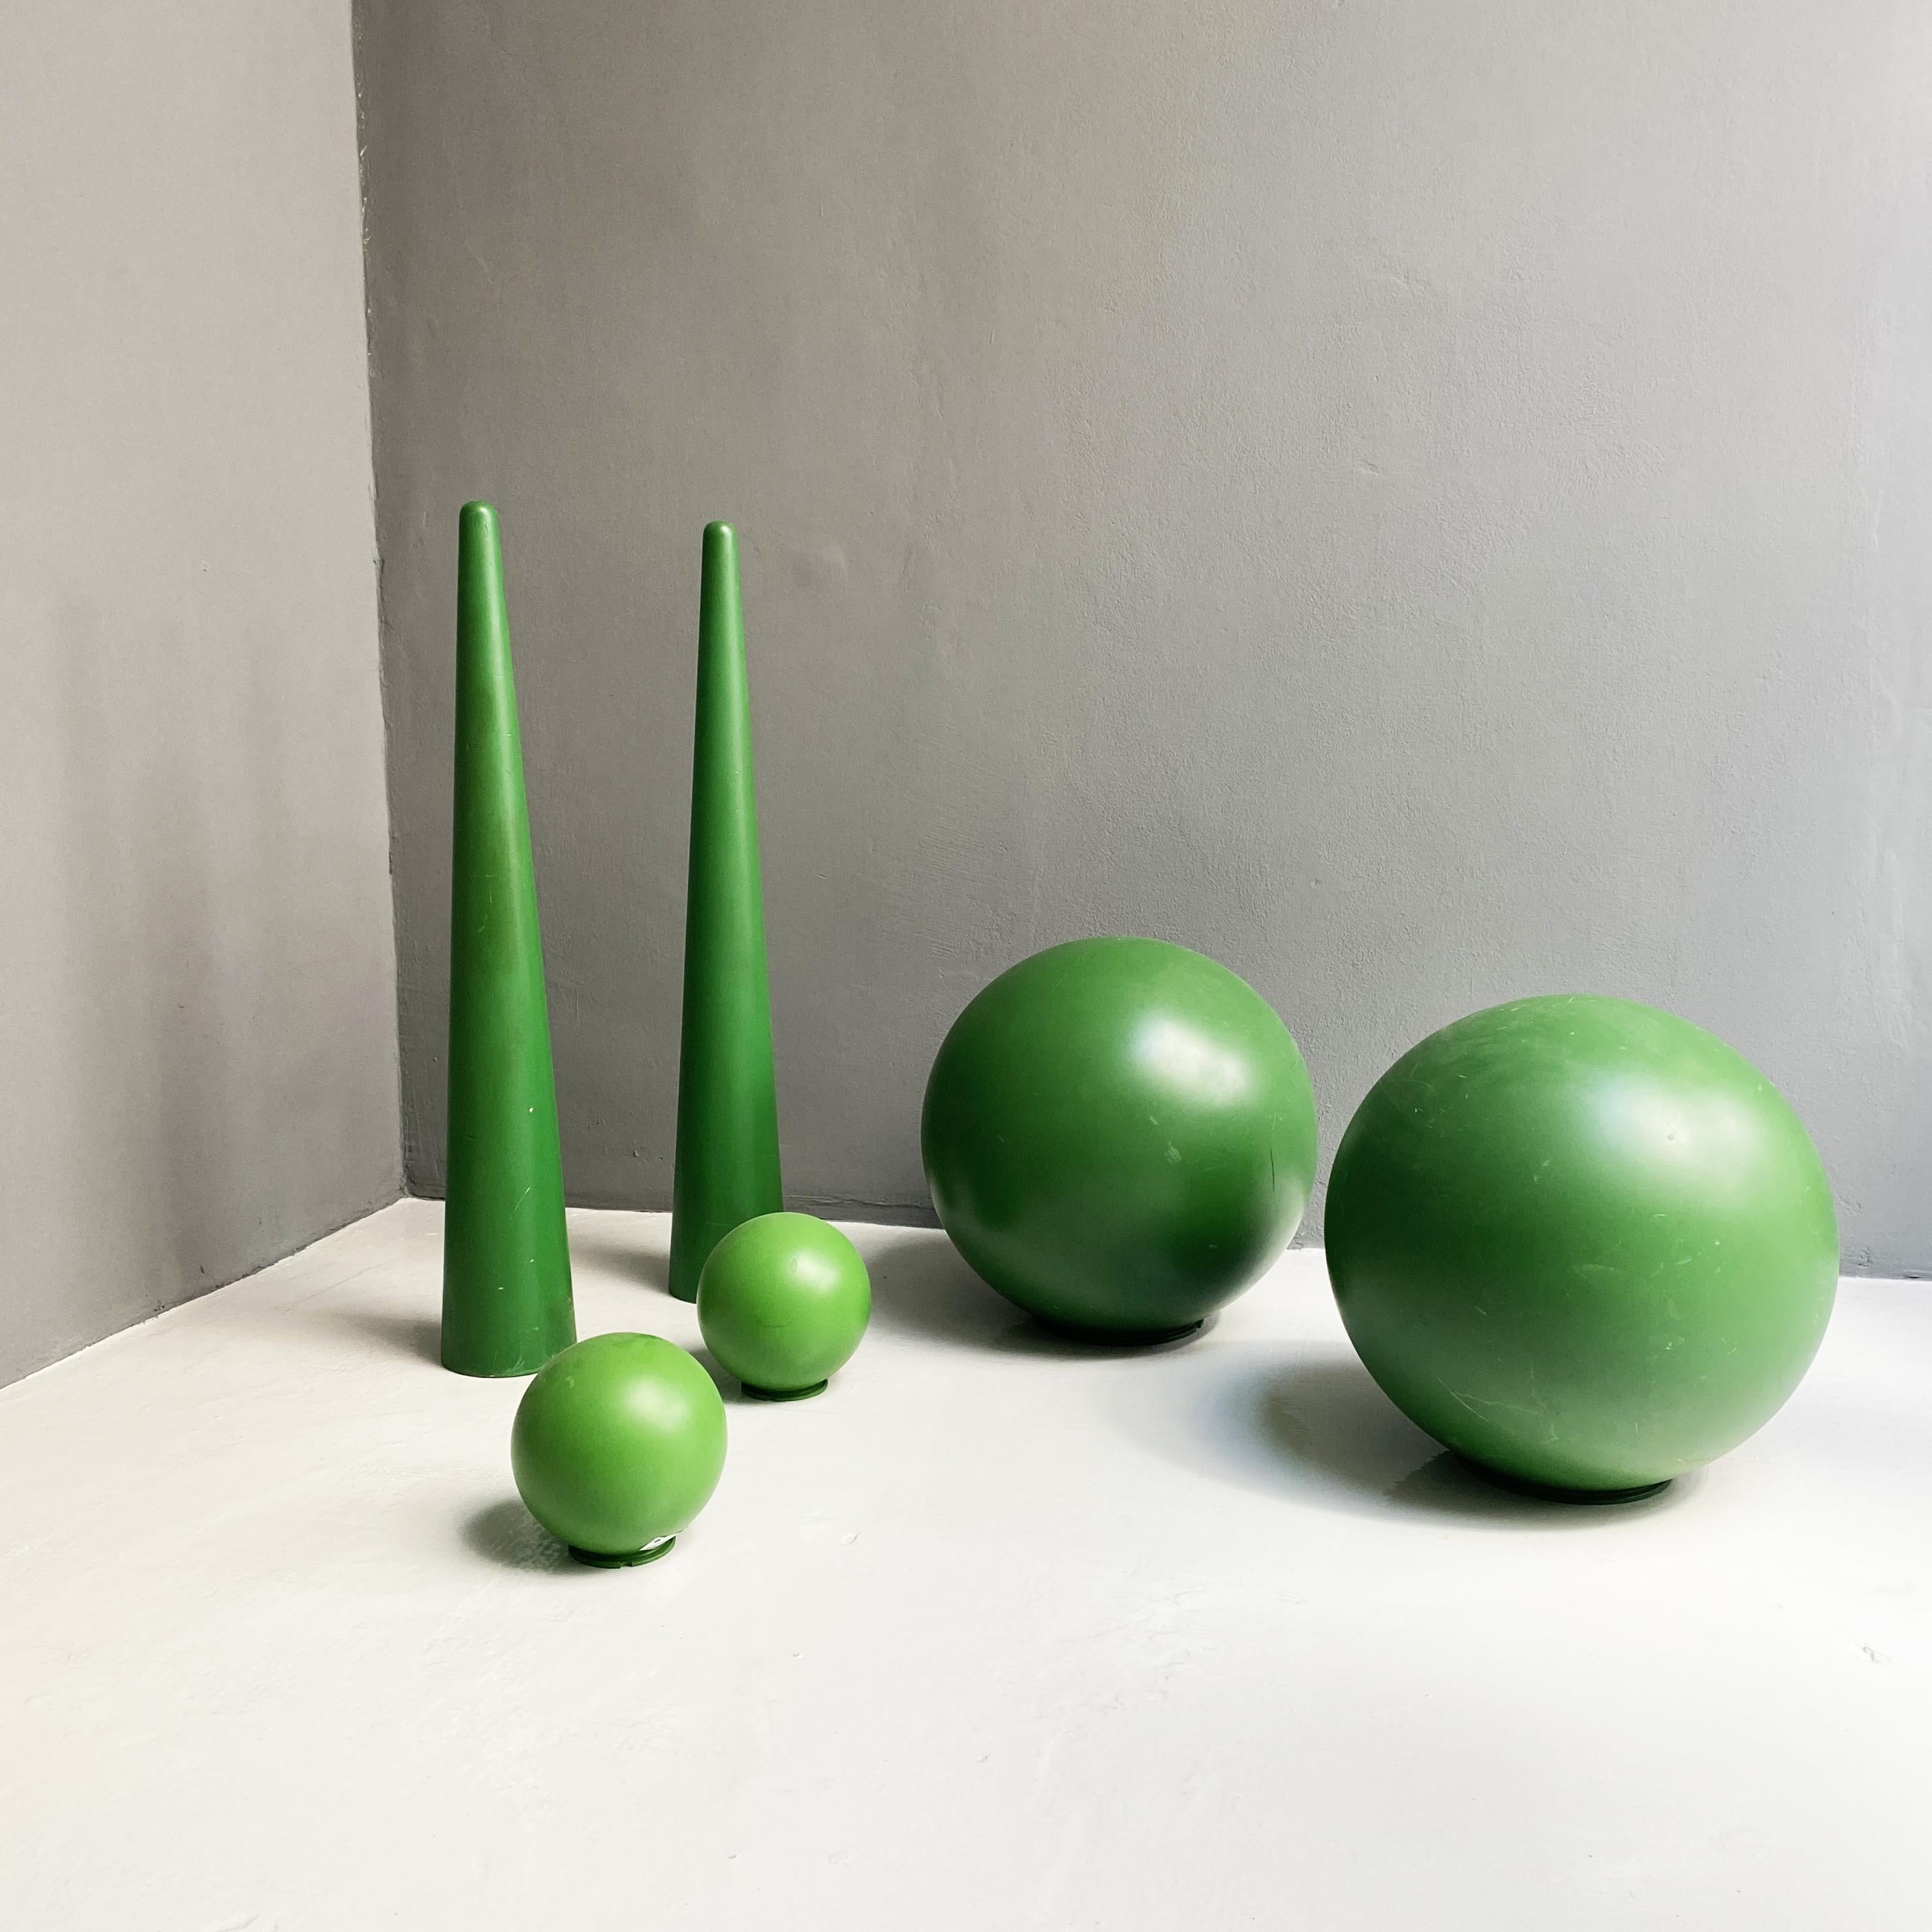 Italian Modern Green Plastic Props for Scenography, 1990s For Sale 1